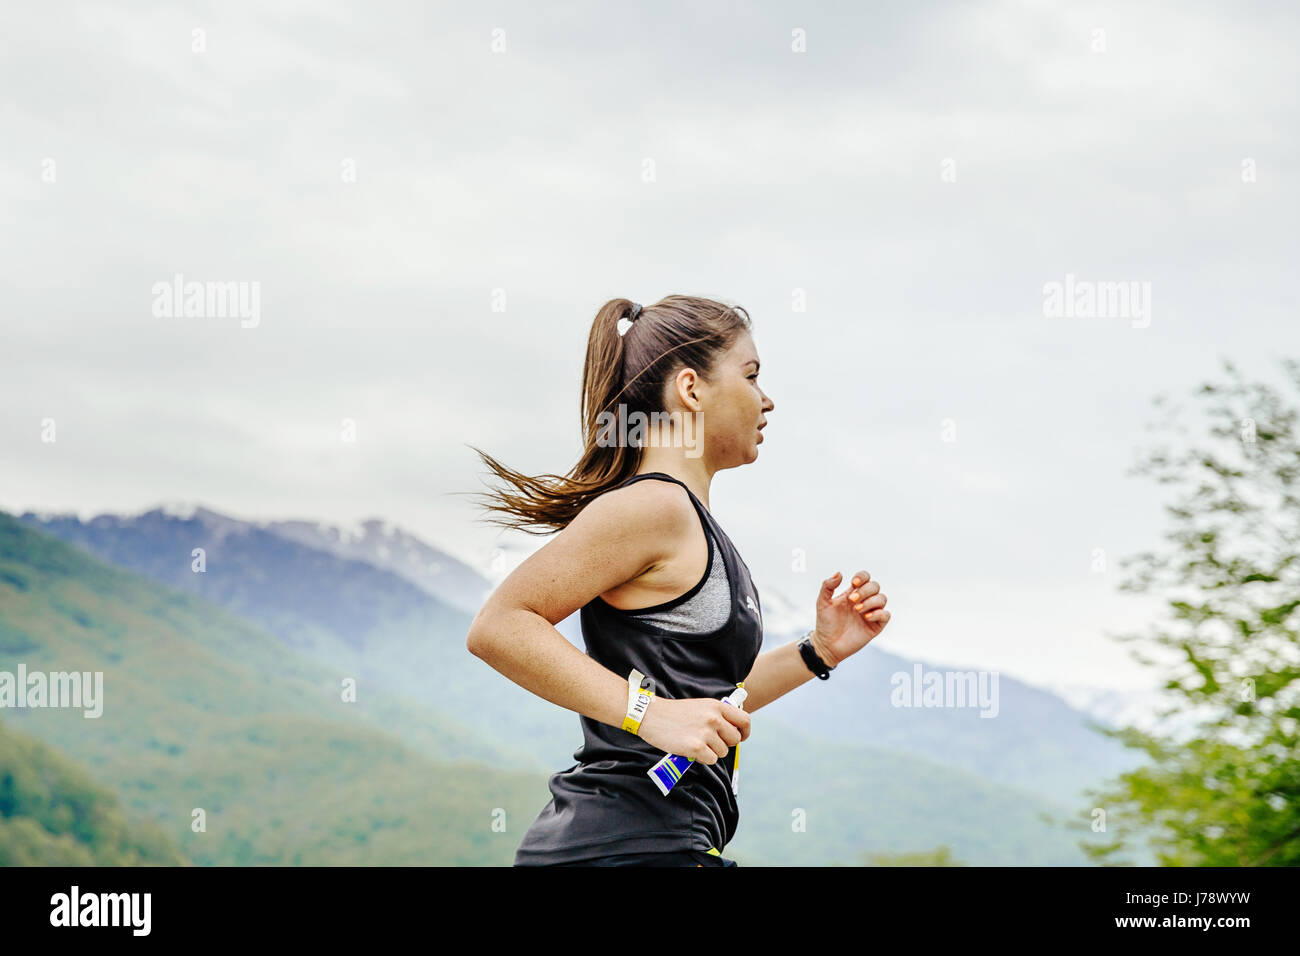 young girl runner with energy nutrient gel in hand running in race Spring mountain marathon Stock Photo